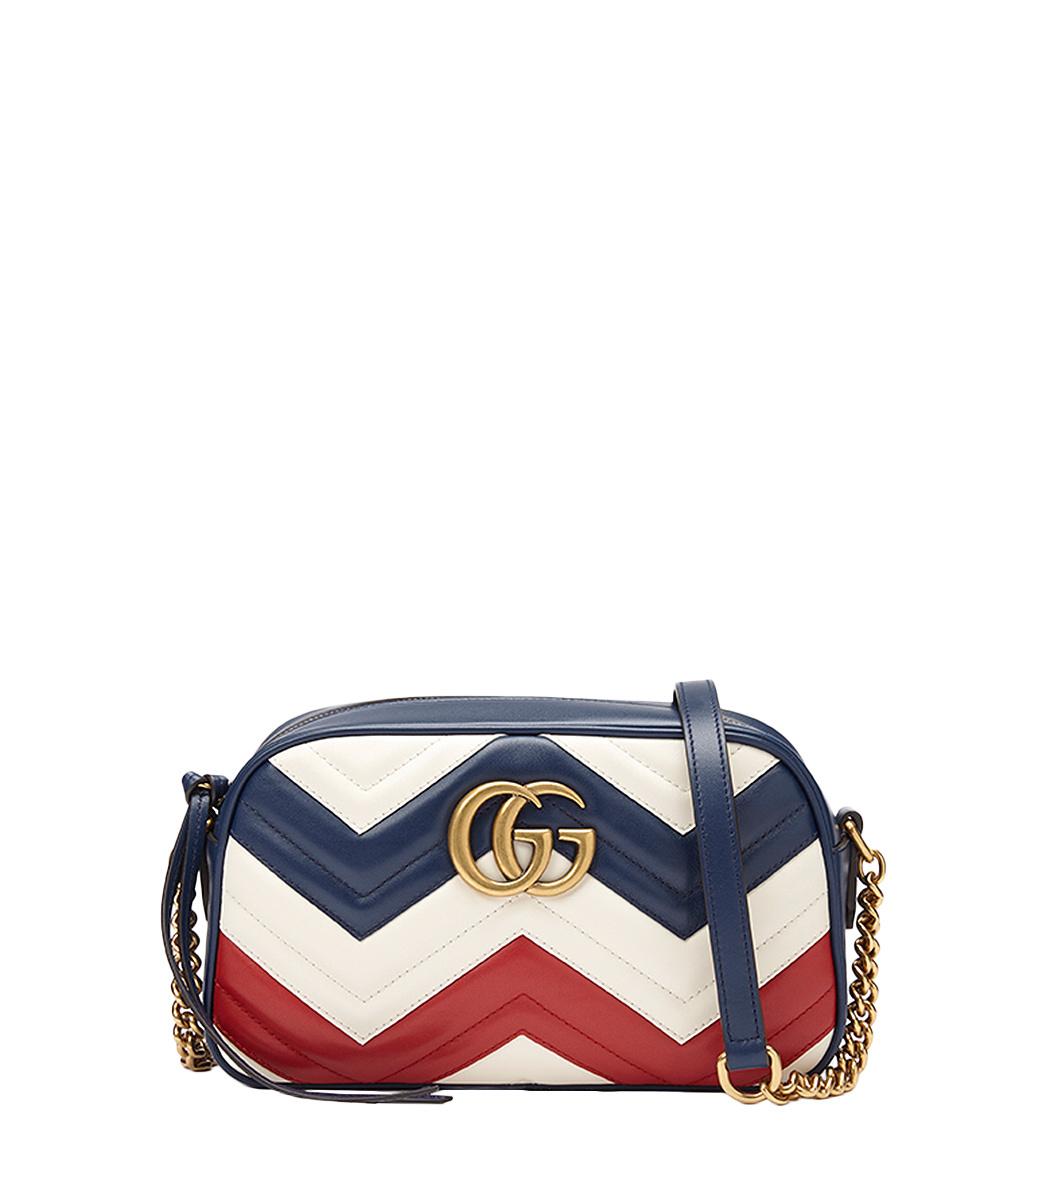 gucci red white and blue bag